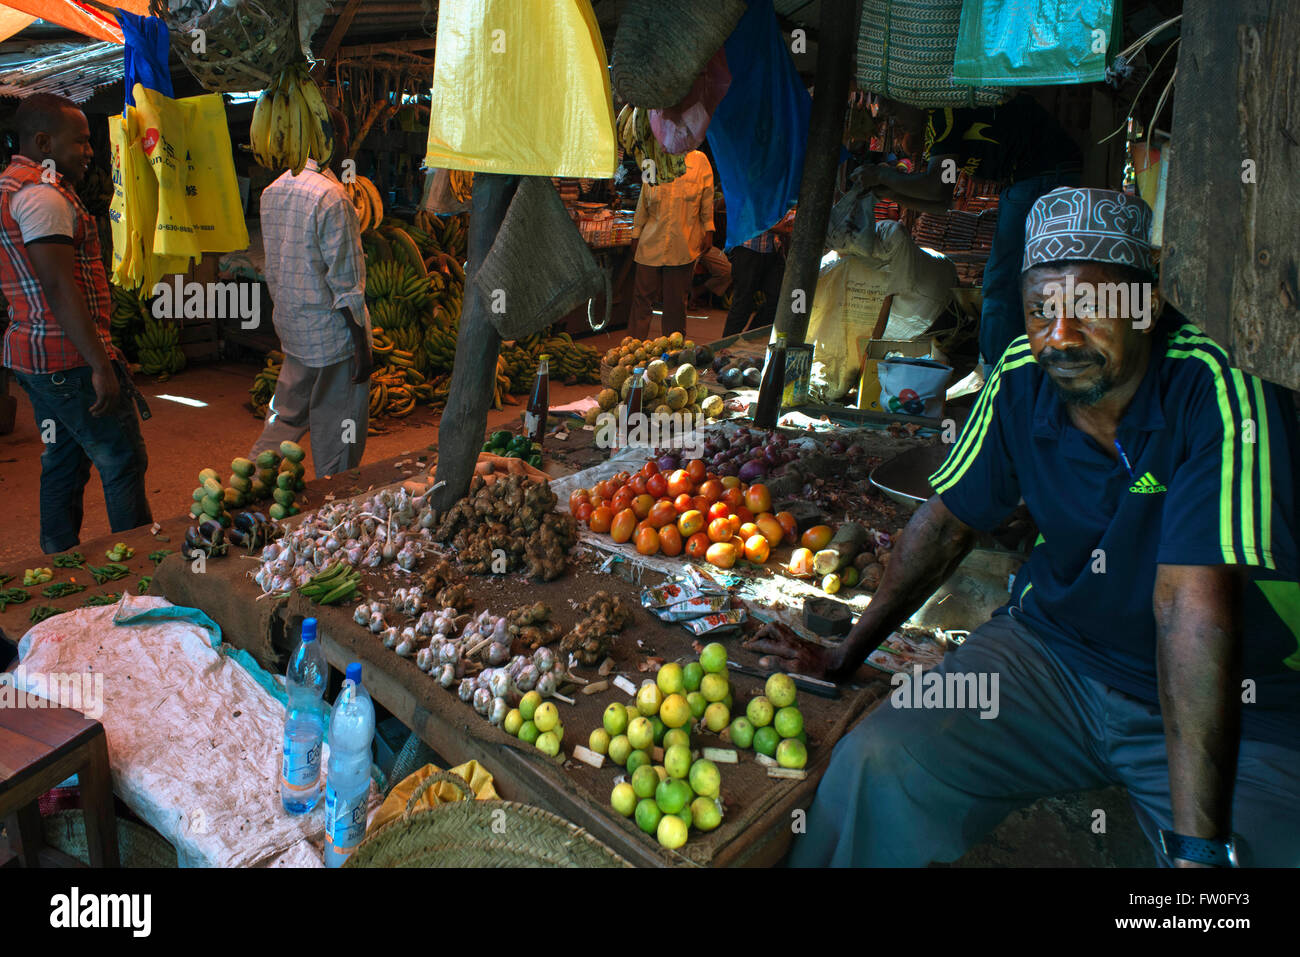 Sale of limes, tomatoes and different types of vegetables in the Stone Town market, Zanzibar, Tanzania. Stock Photo